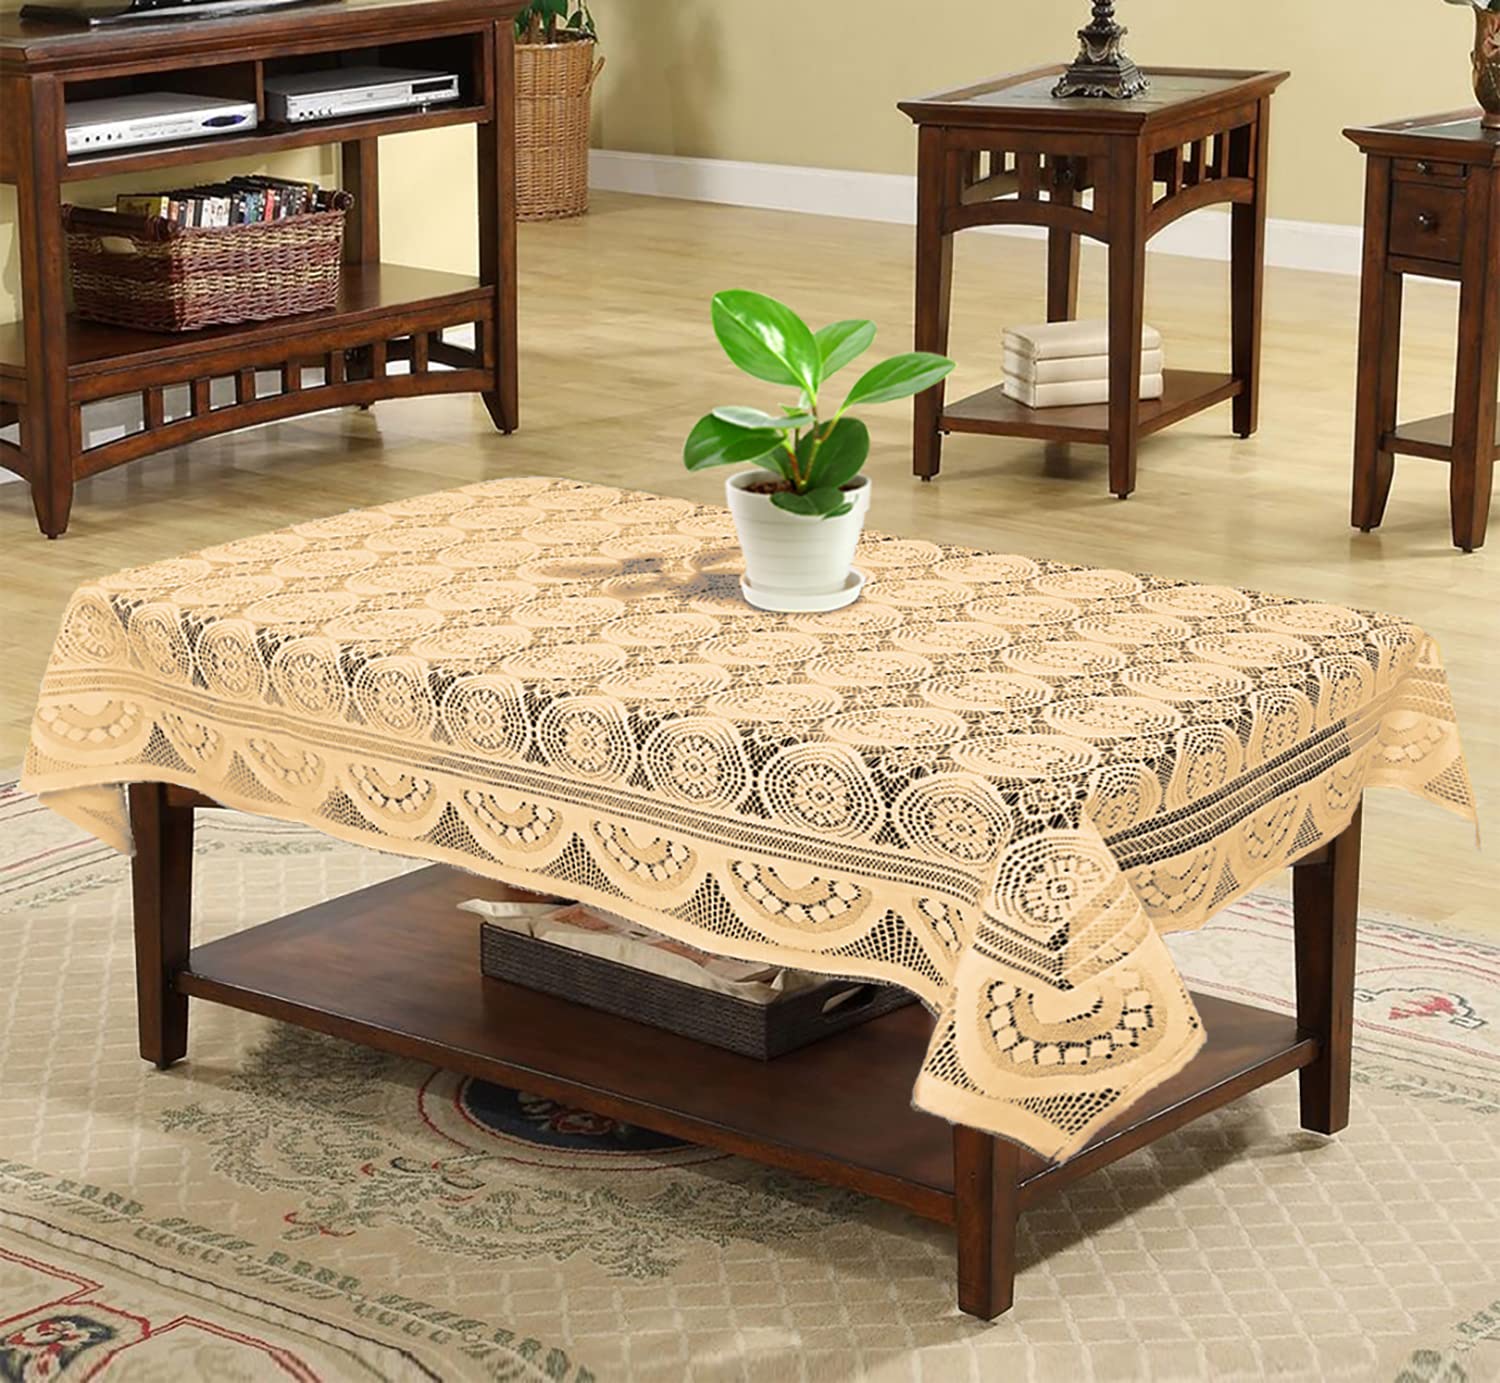 Kuber Industries Circle Printed Cotton 4 Seater Center Table Cover,40"x60" (Cream)-44KM07